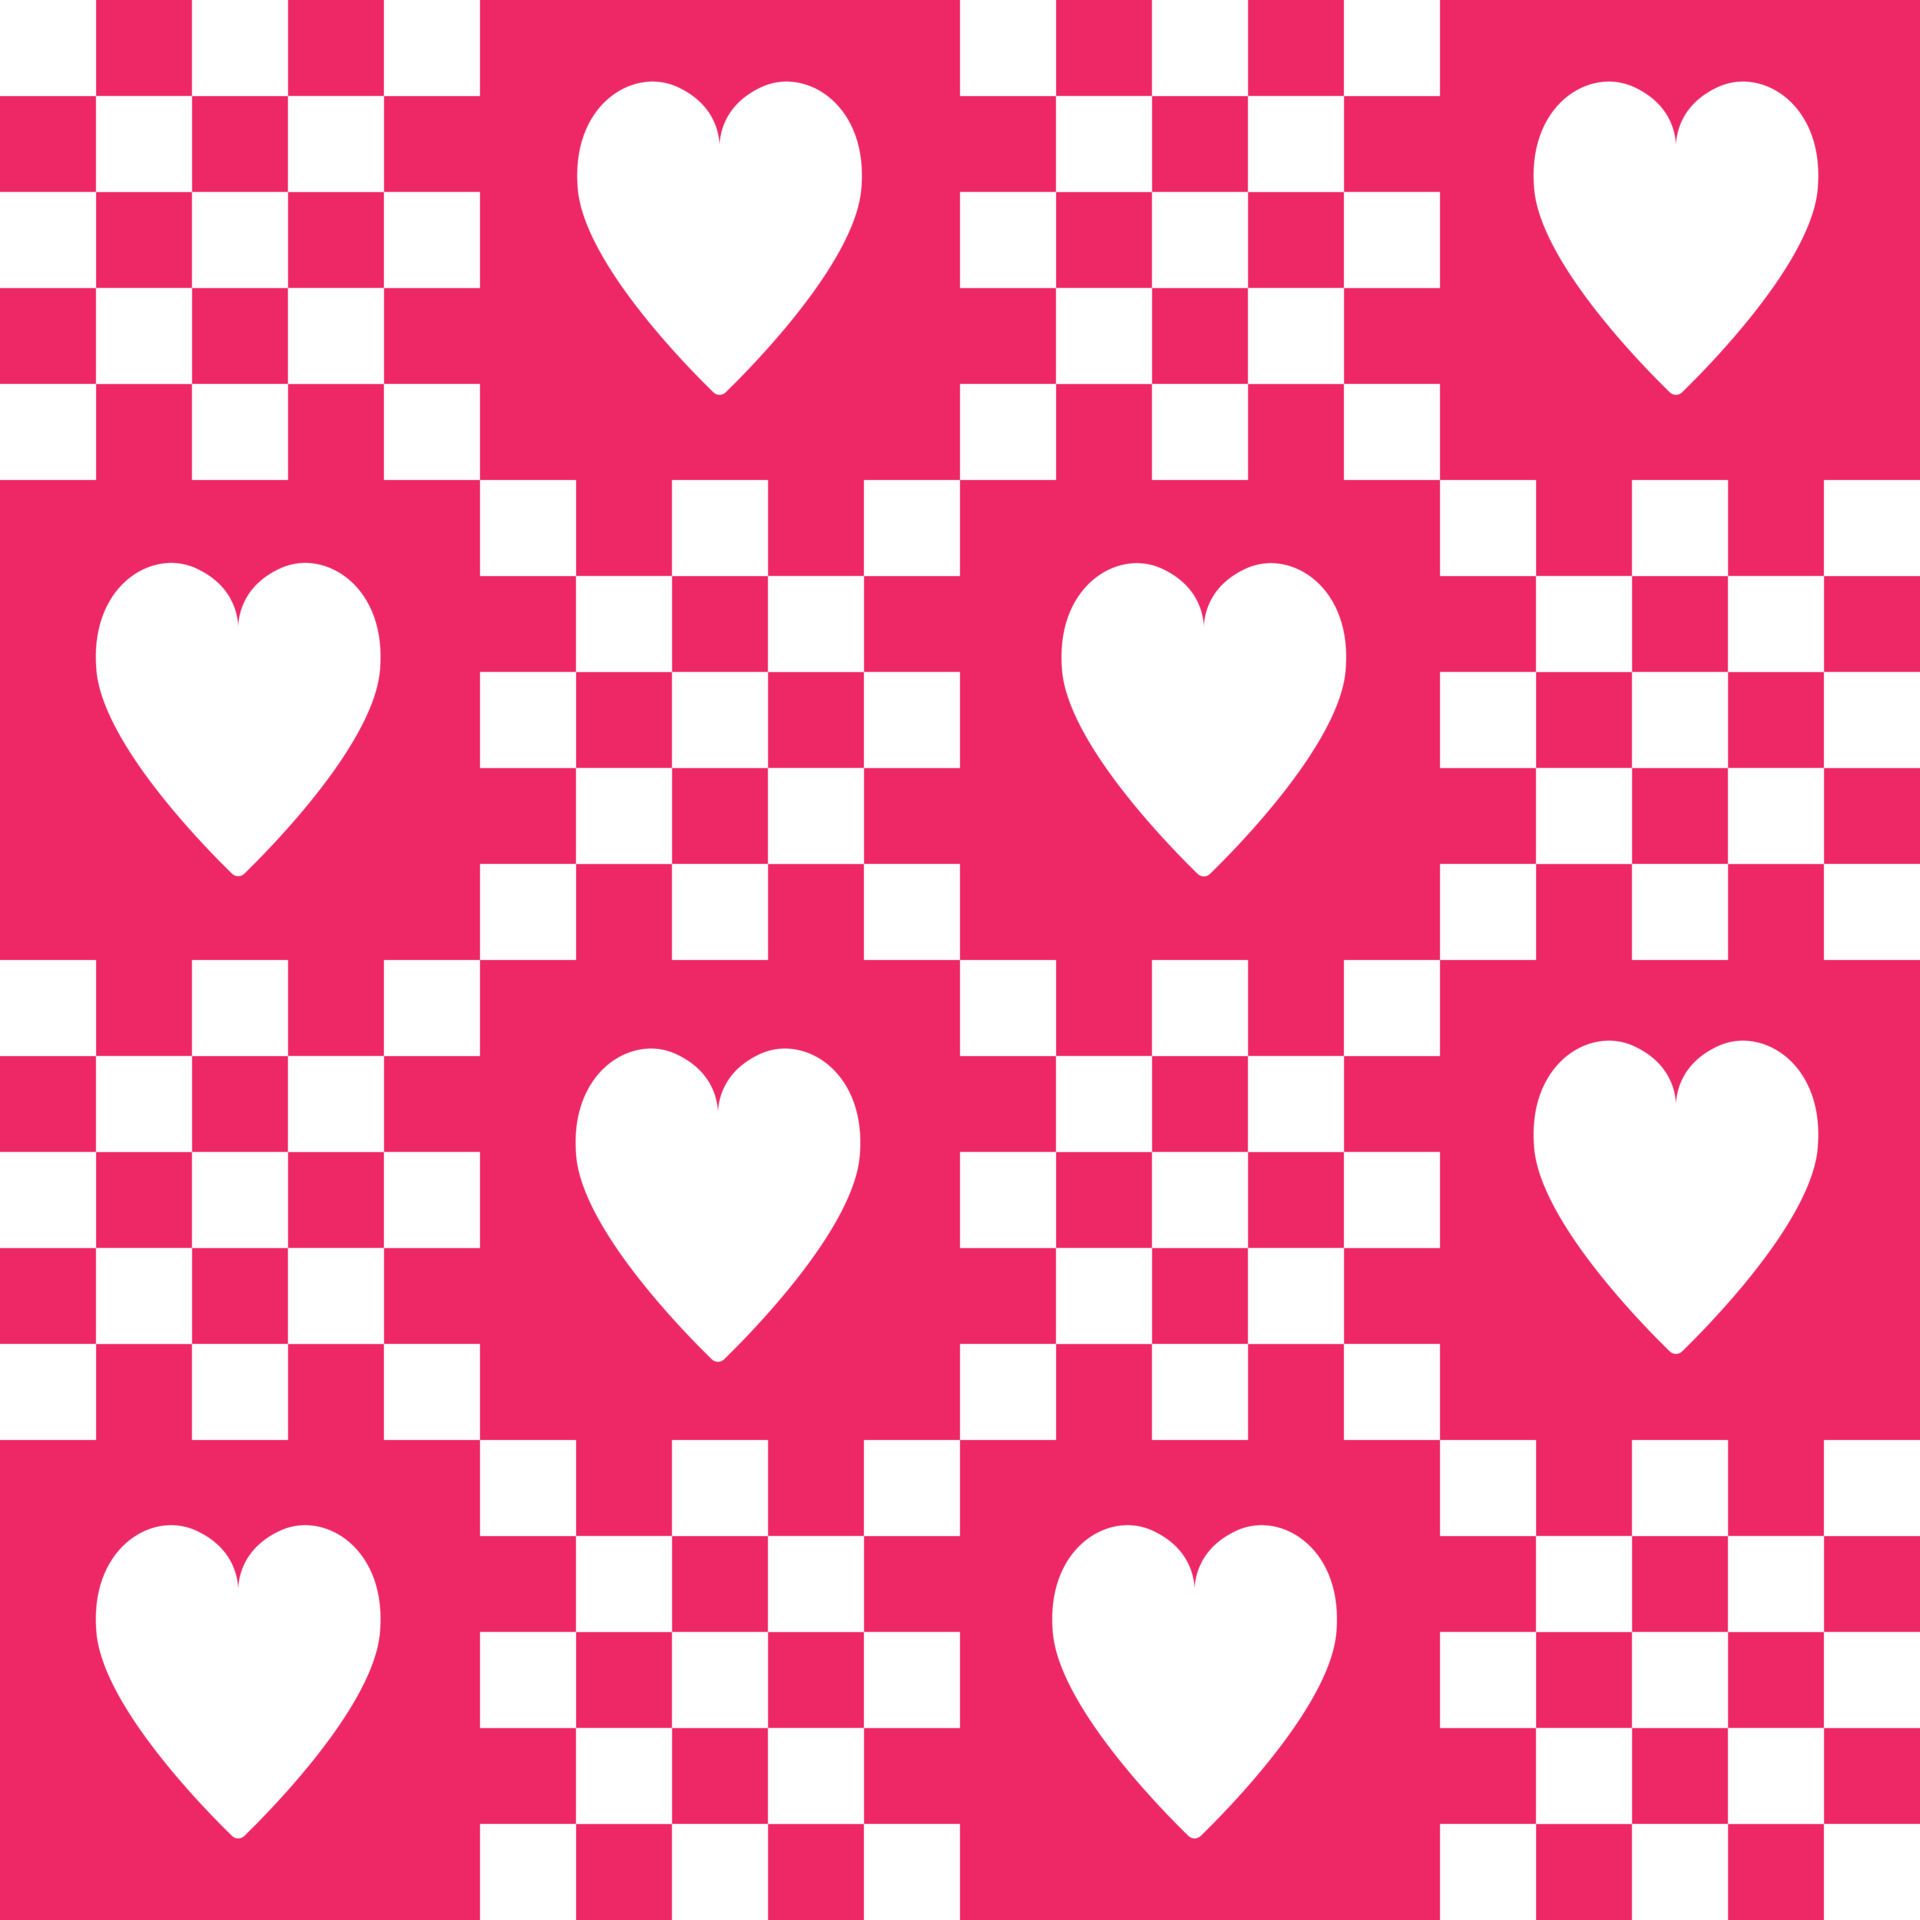 A pink and white checkered background with white hearts - Black heart